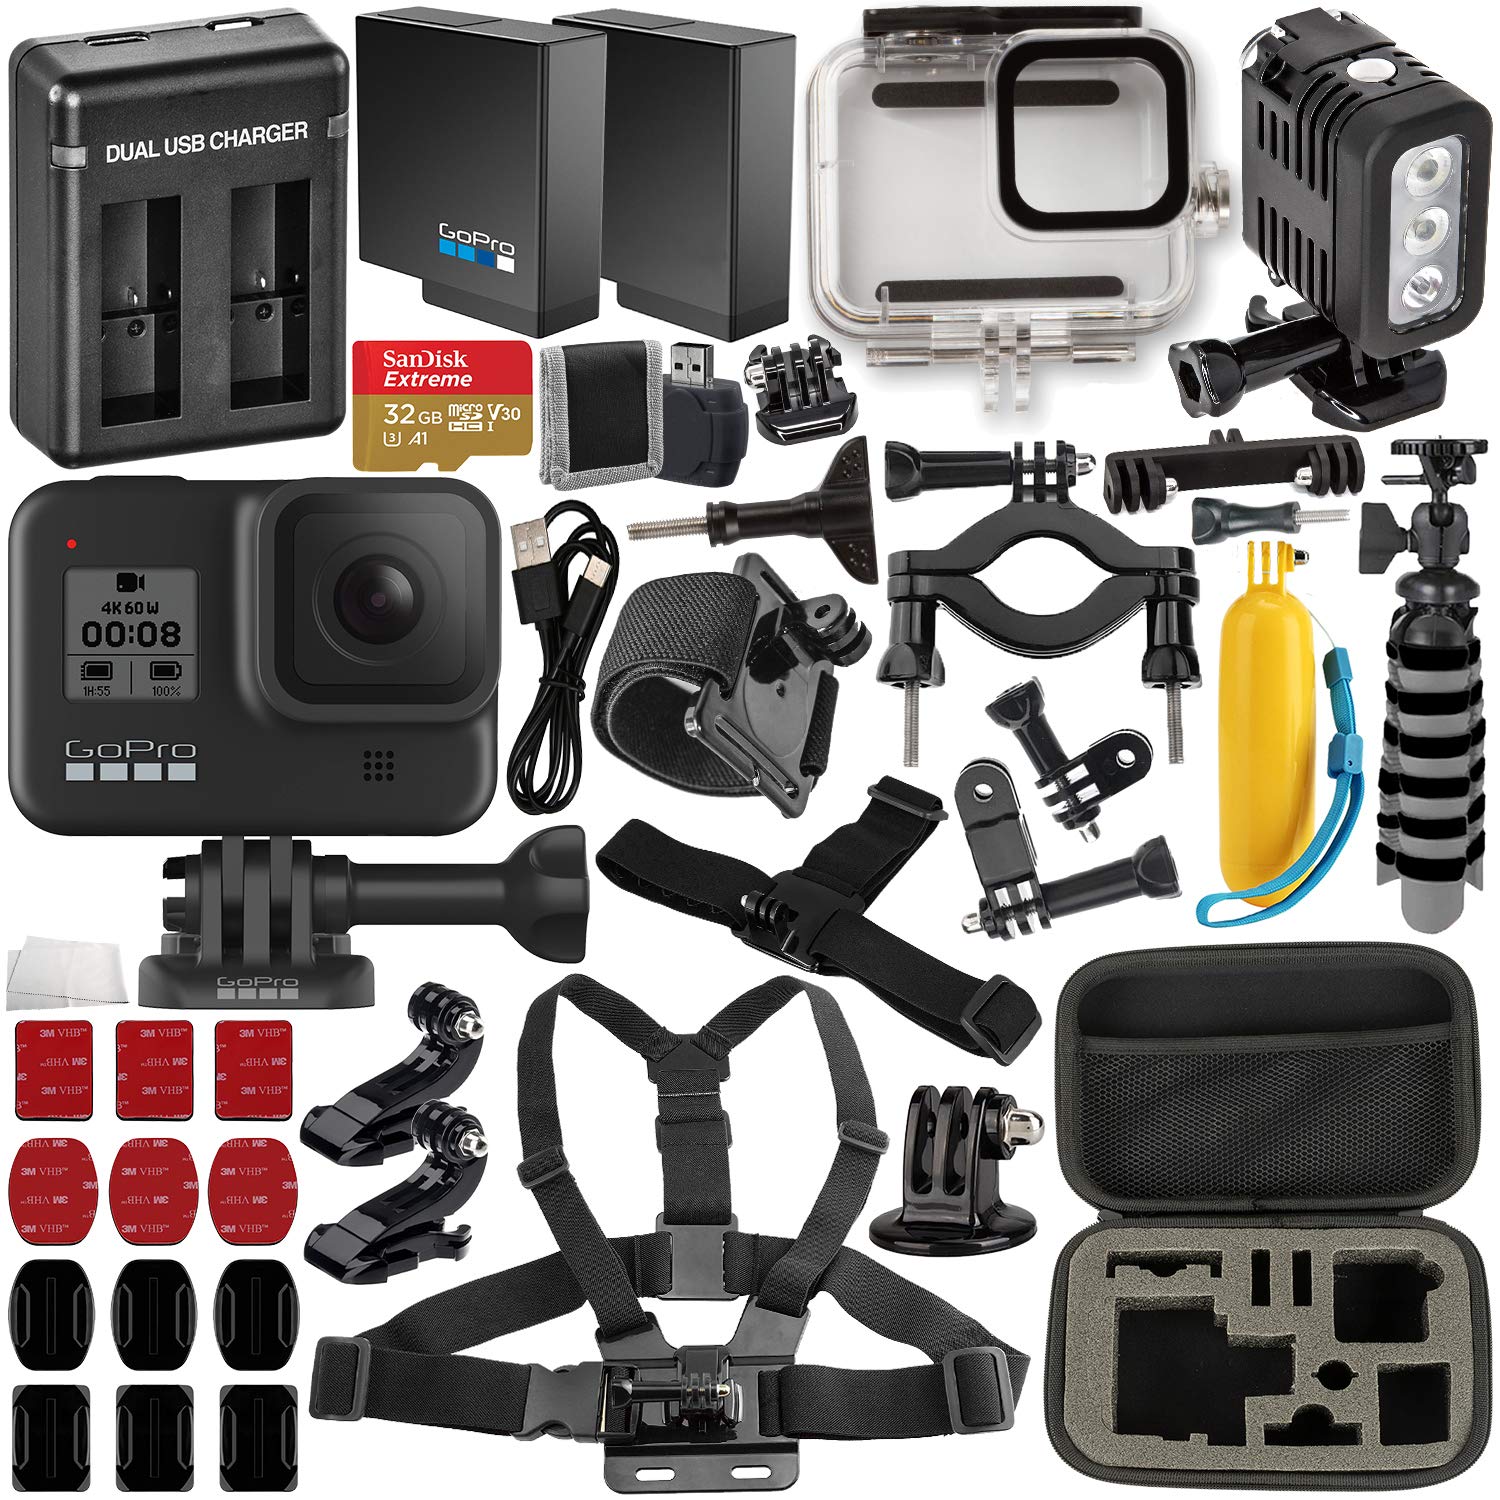 GoPro HERO8 Black with Deluxe Accessory Bundle Includes: SanDisk